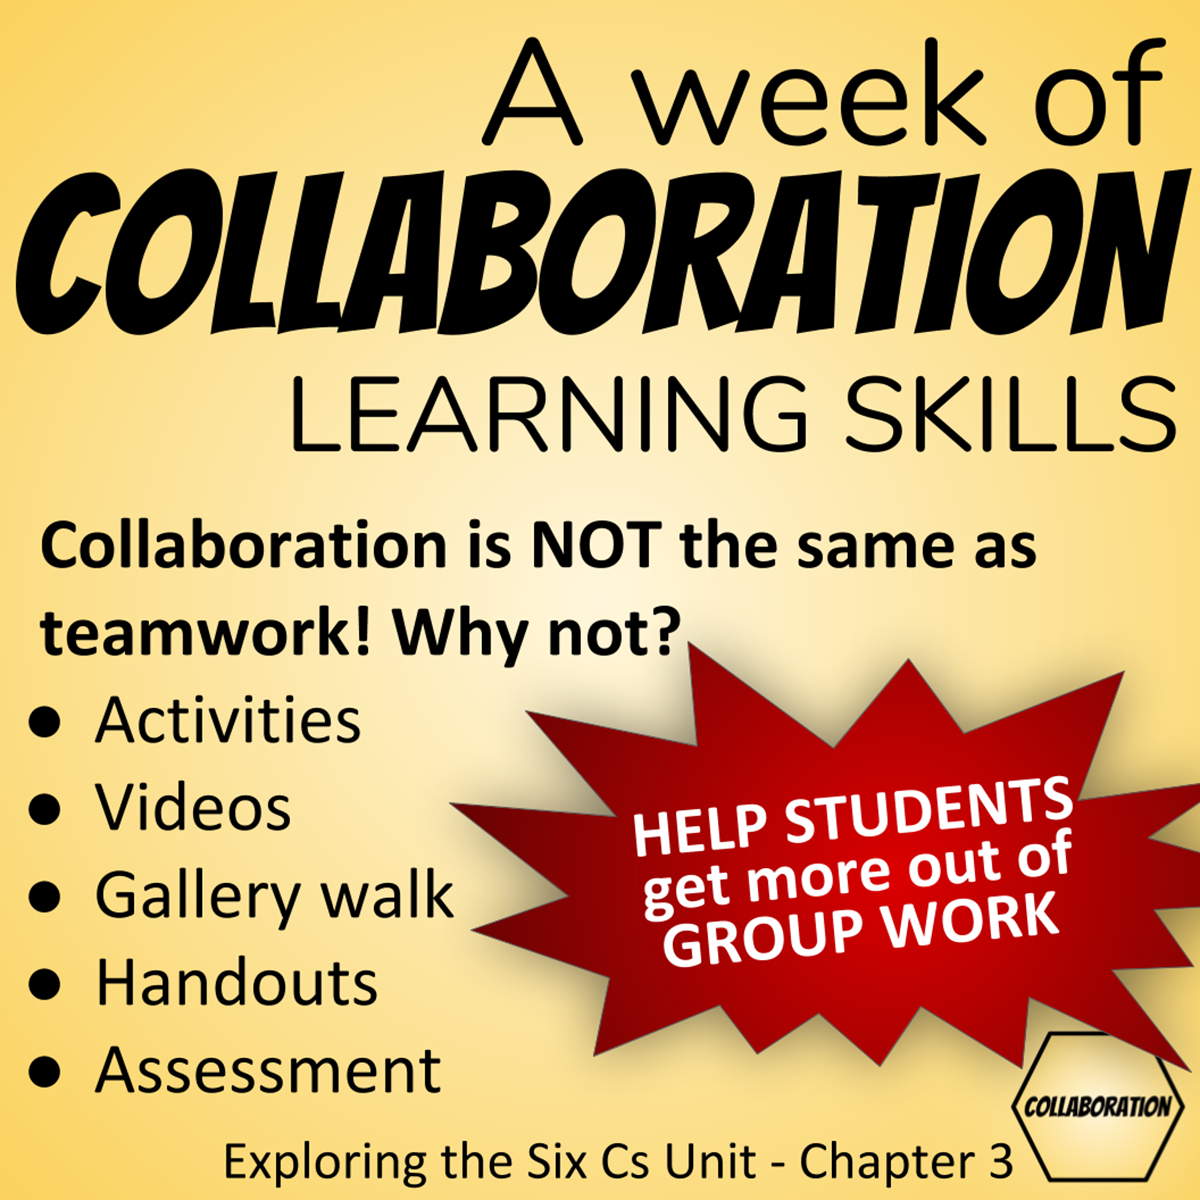 A week of Collaboration Learning Skills: Collaboration is NOT the same as teamwork! Why not? Activities, Videos, Gallery Walk, Handouts, Assessment: Help students get more out of group work